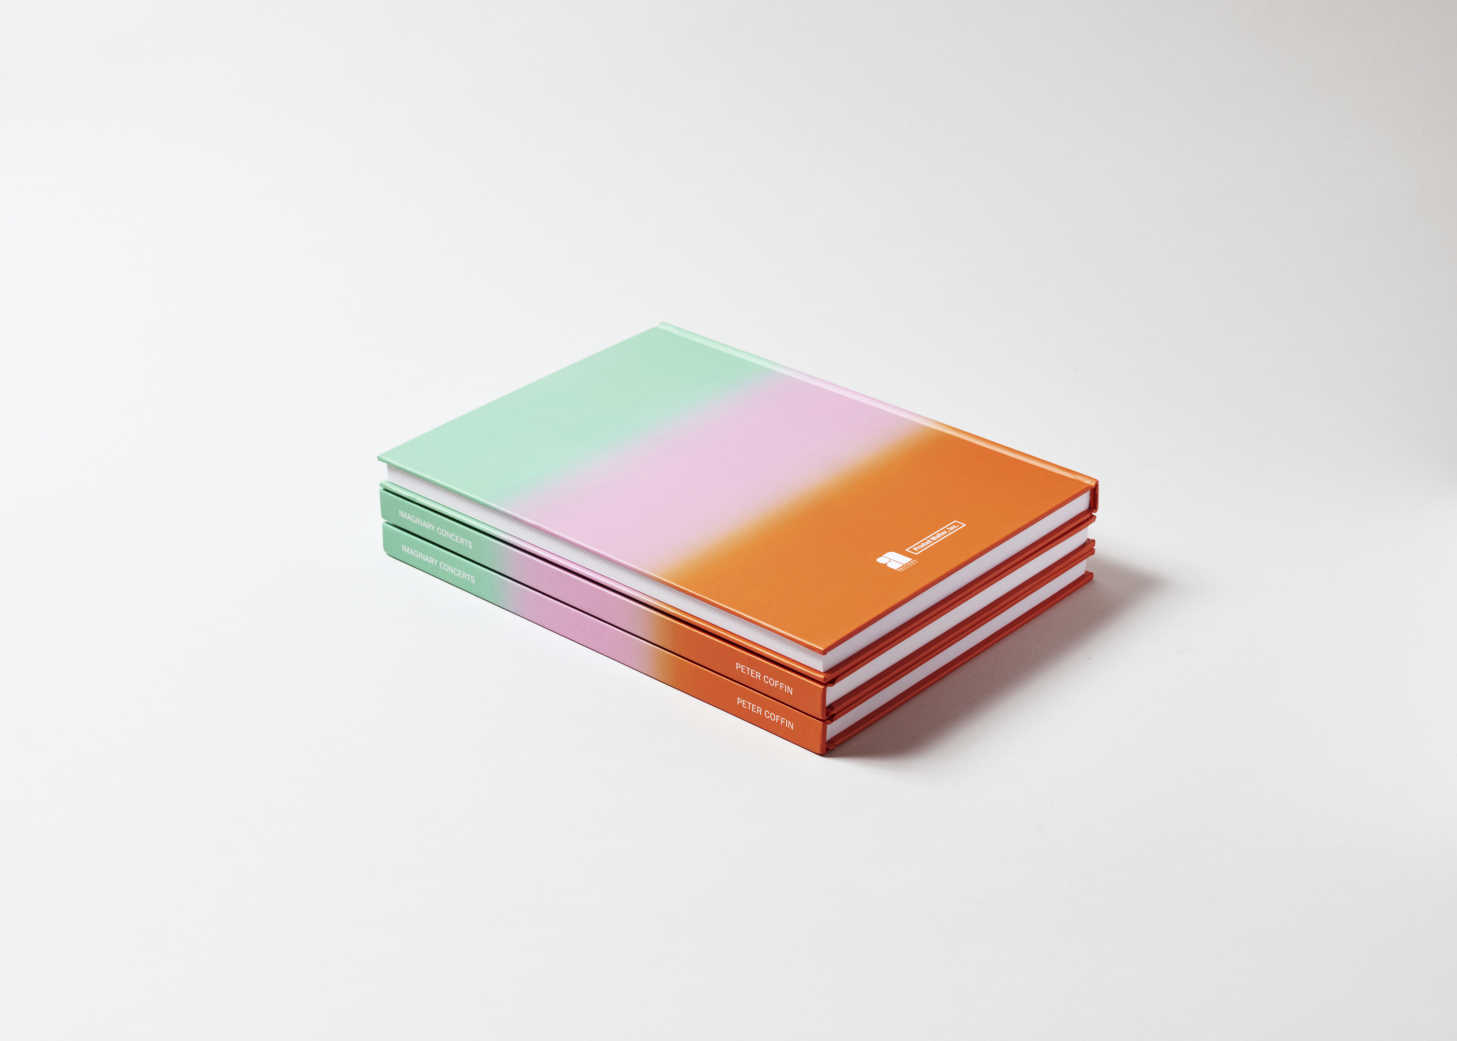 Stack of three books painted in descending swatches of green, pink and orange.